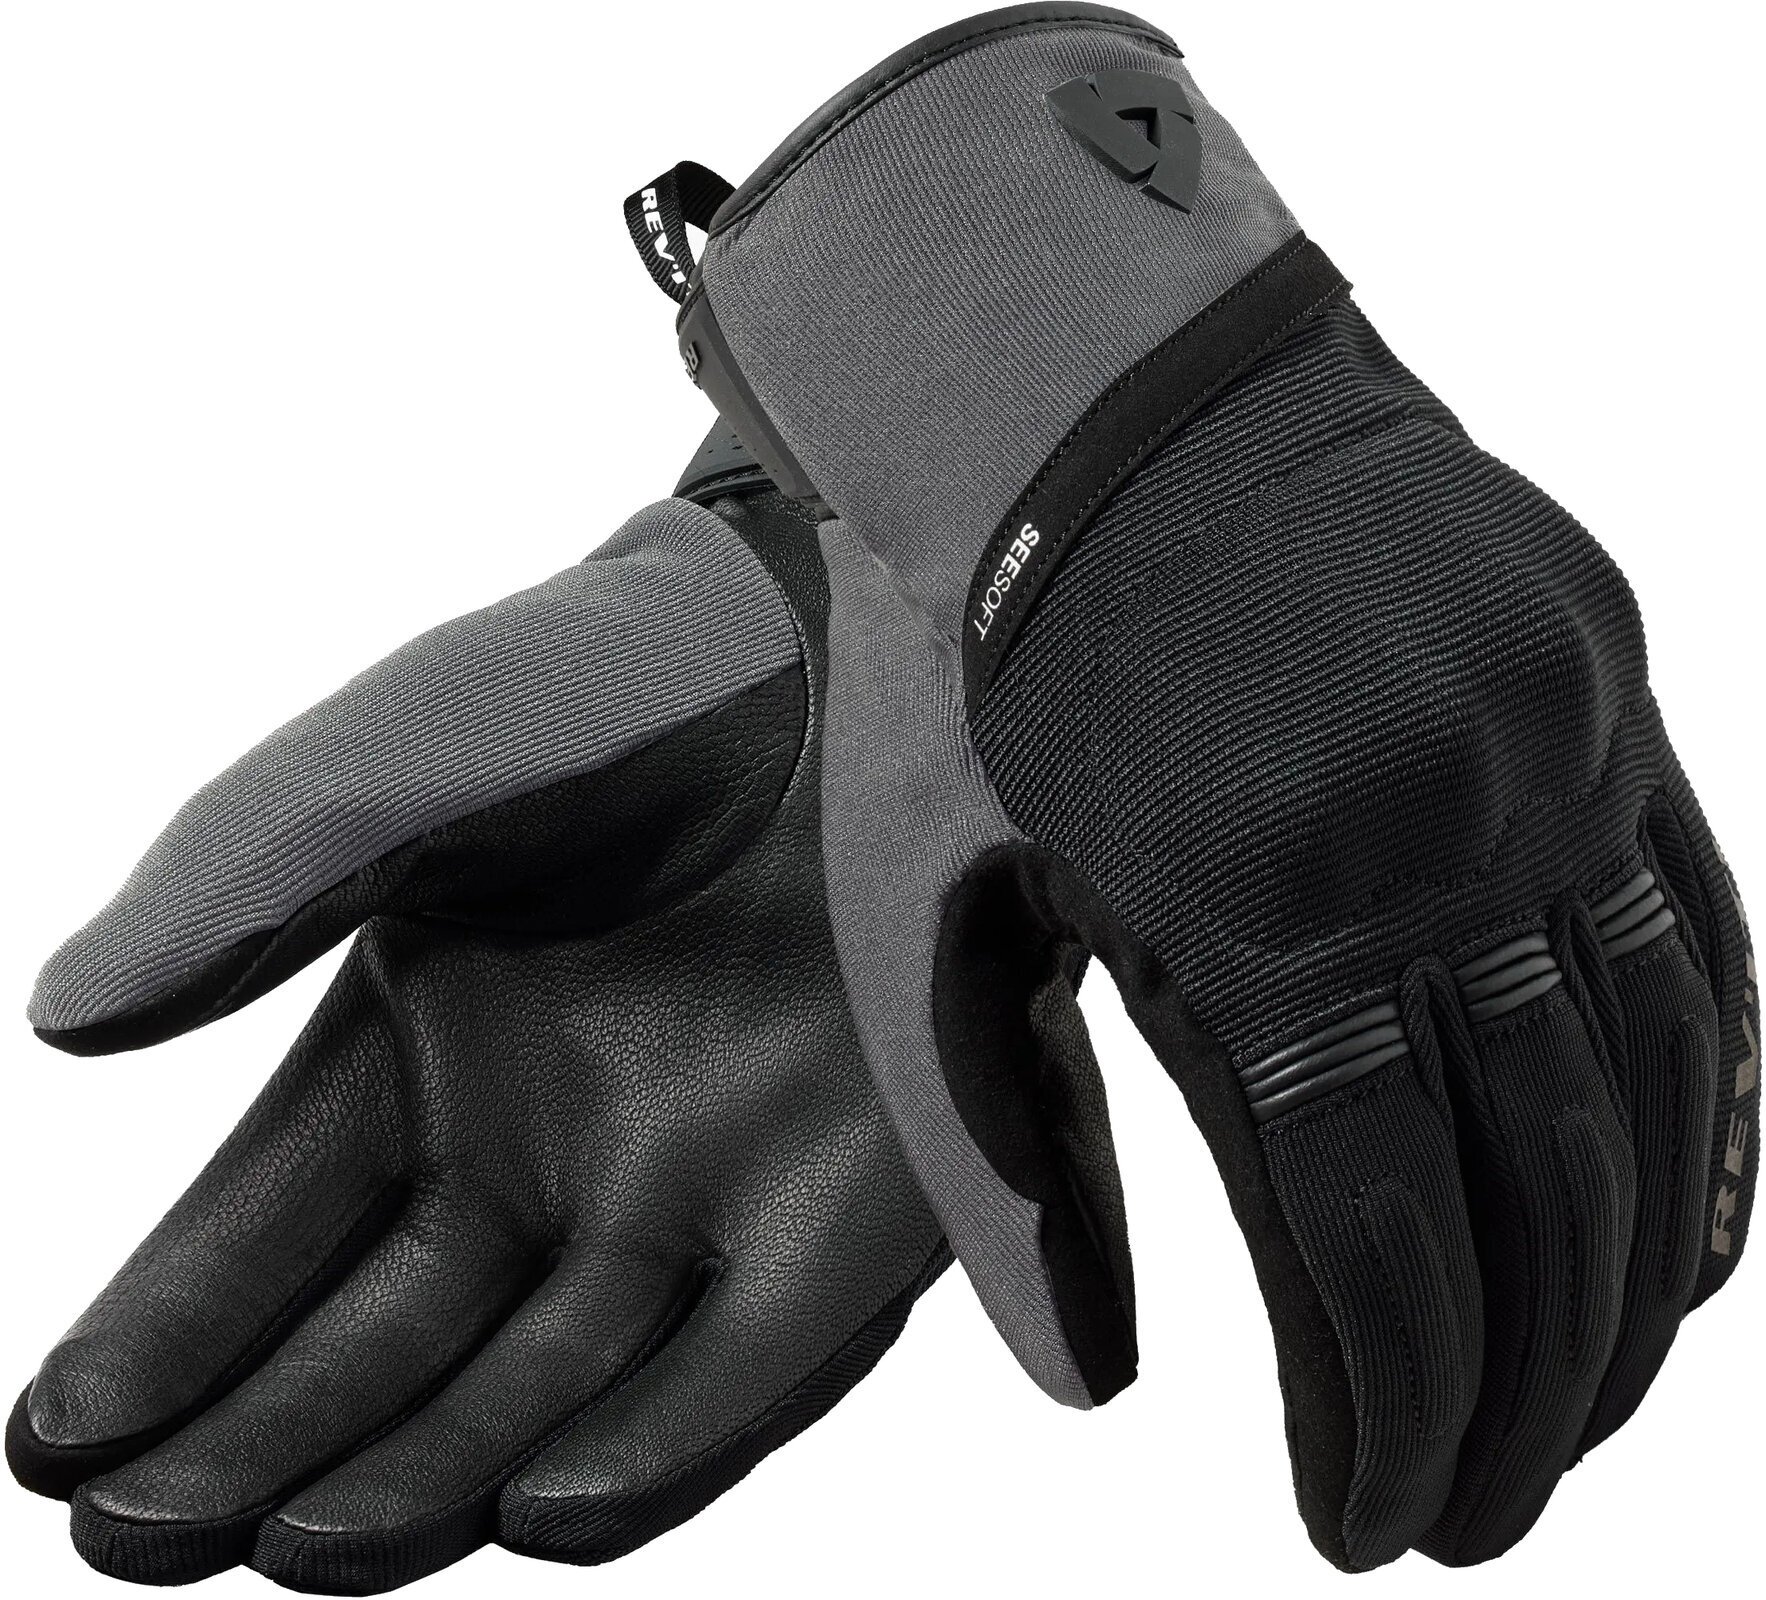 Motorcycle Gloves Rev'it! Gloves Mosca 2 H2O Black/Grey 3XL Motorcycle Gloves